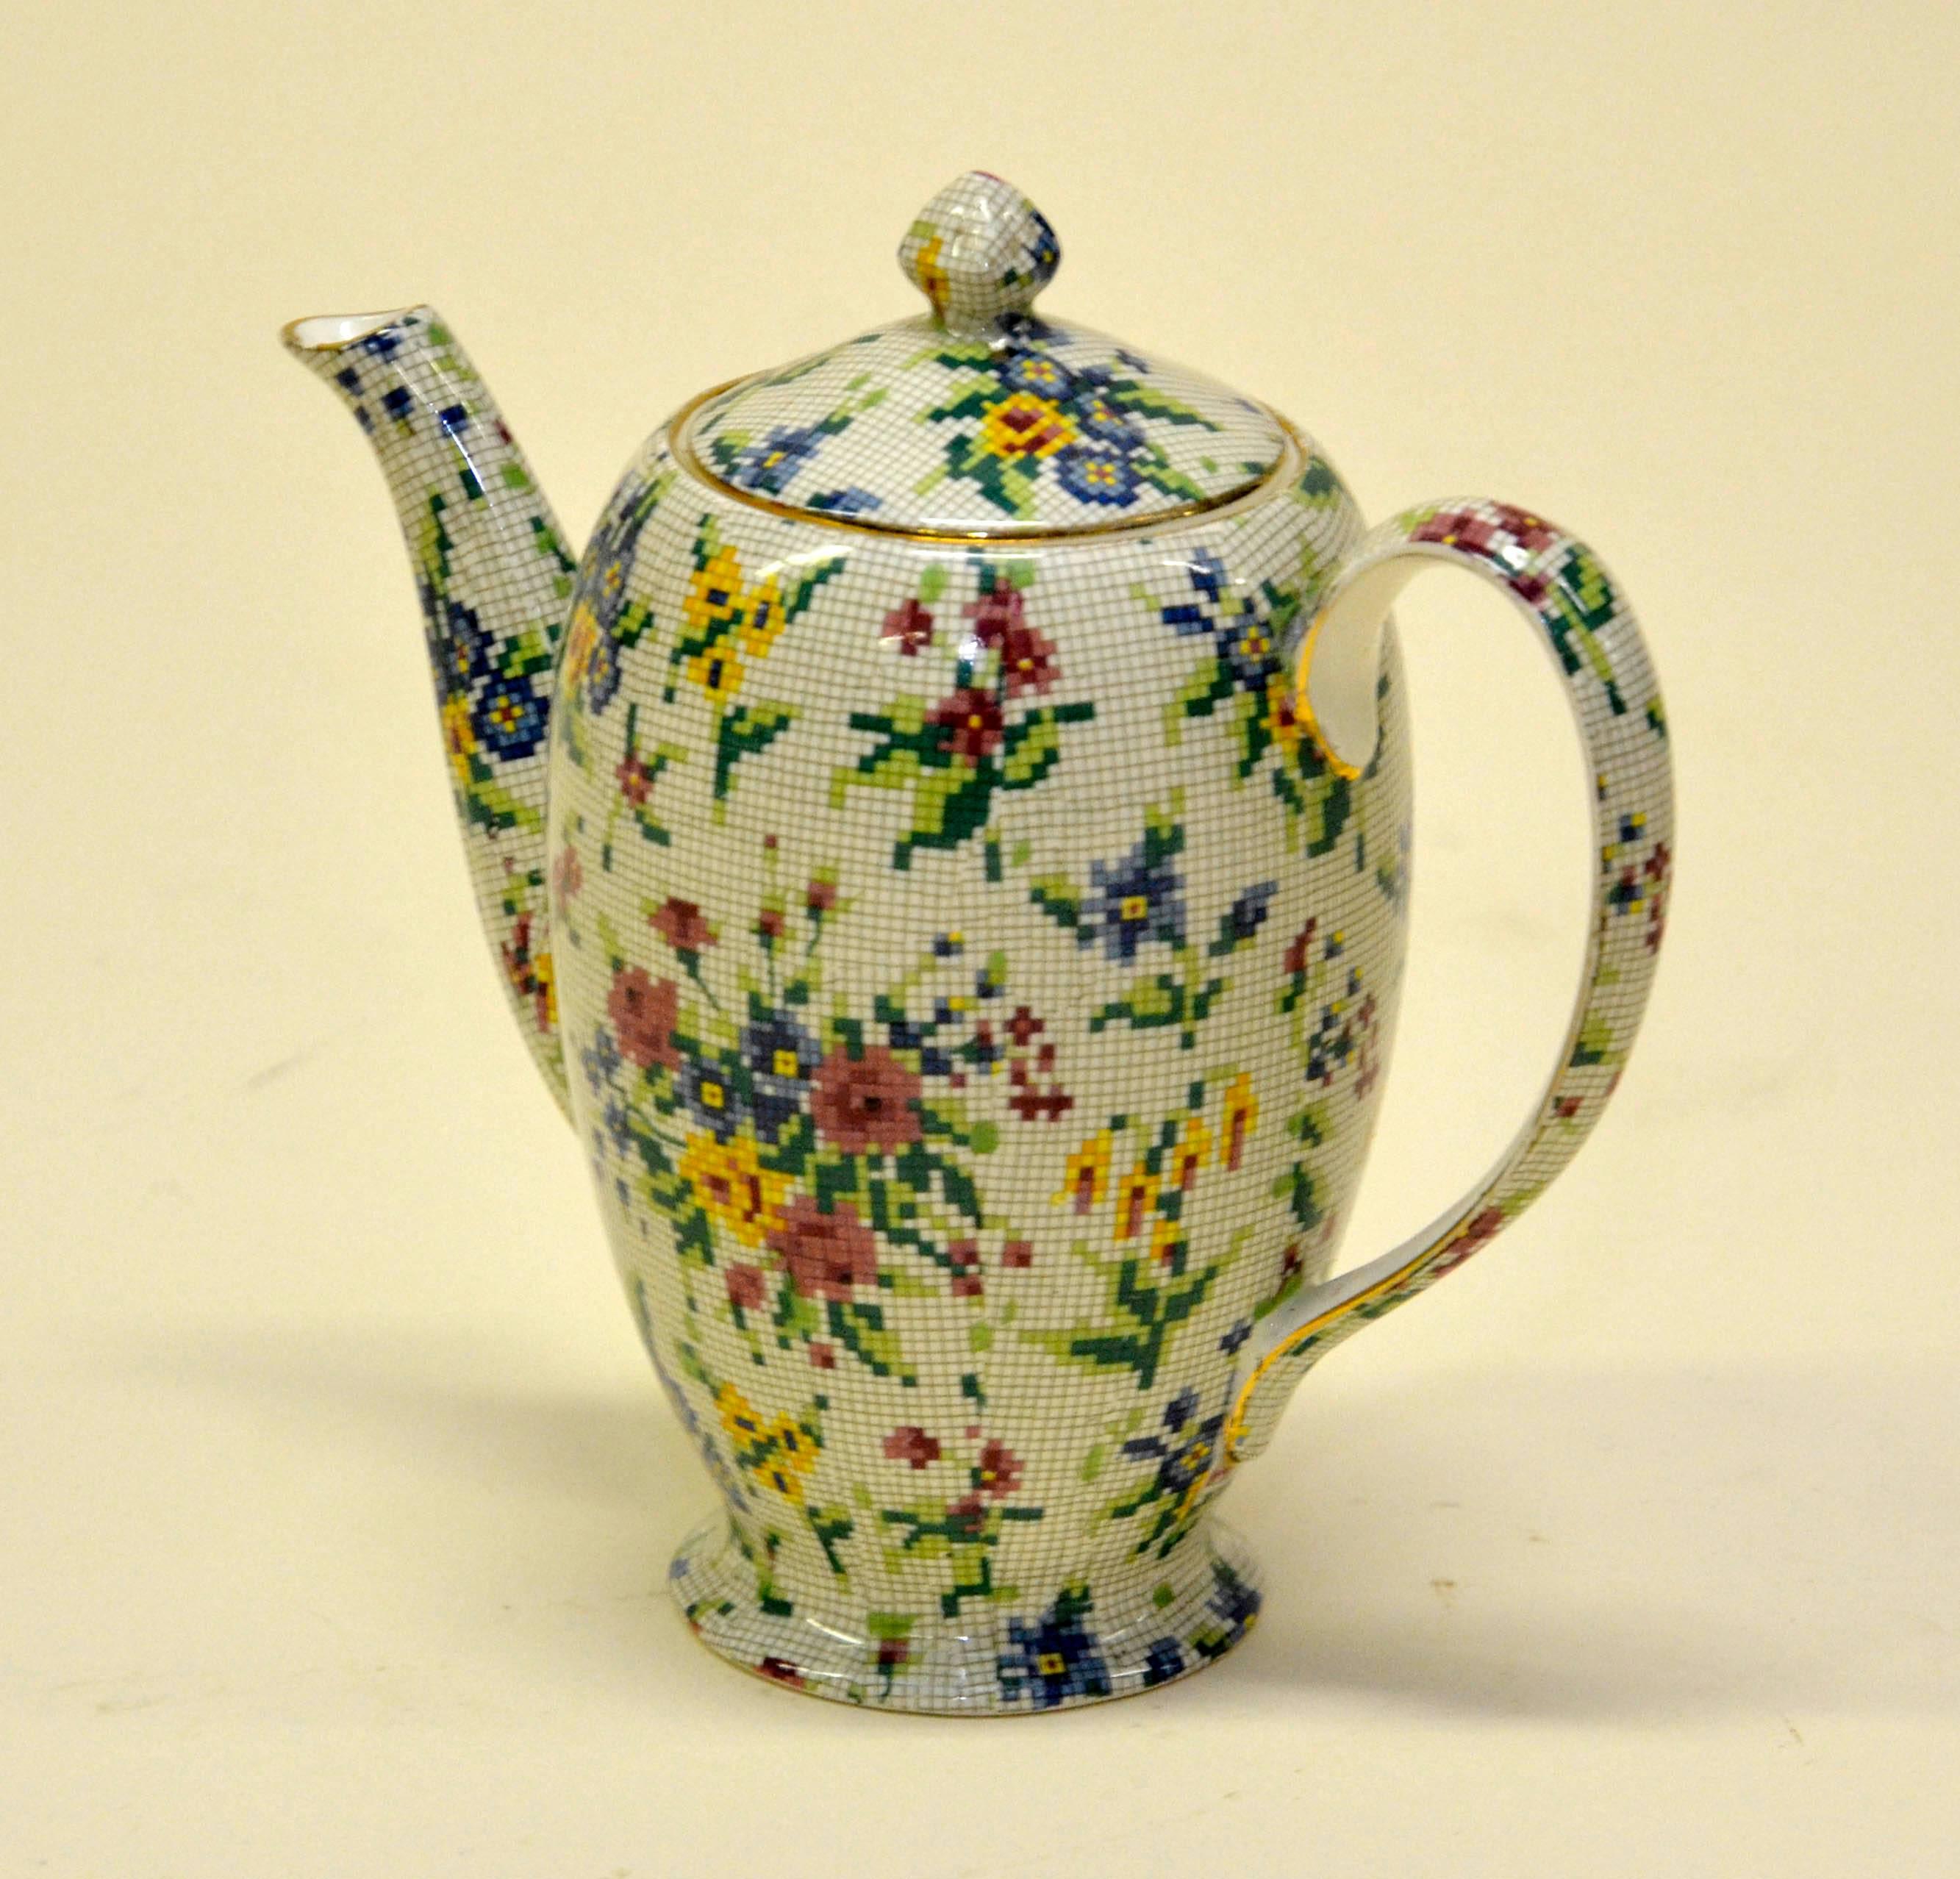 Rare Royal Winton earthenware coffee pot in pristine condition, not restored and ready to be used. The Queen Anne (1936) needlepoint pattern is part of the famed Chintz collection by Royal Winton. It consiste of bouquets of flowers in pink, blue and